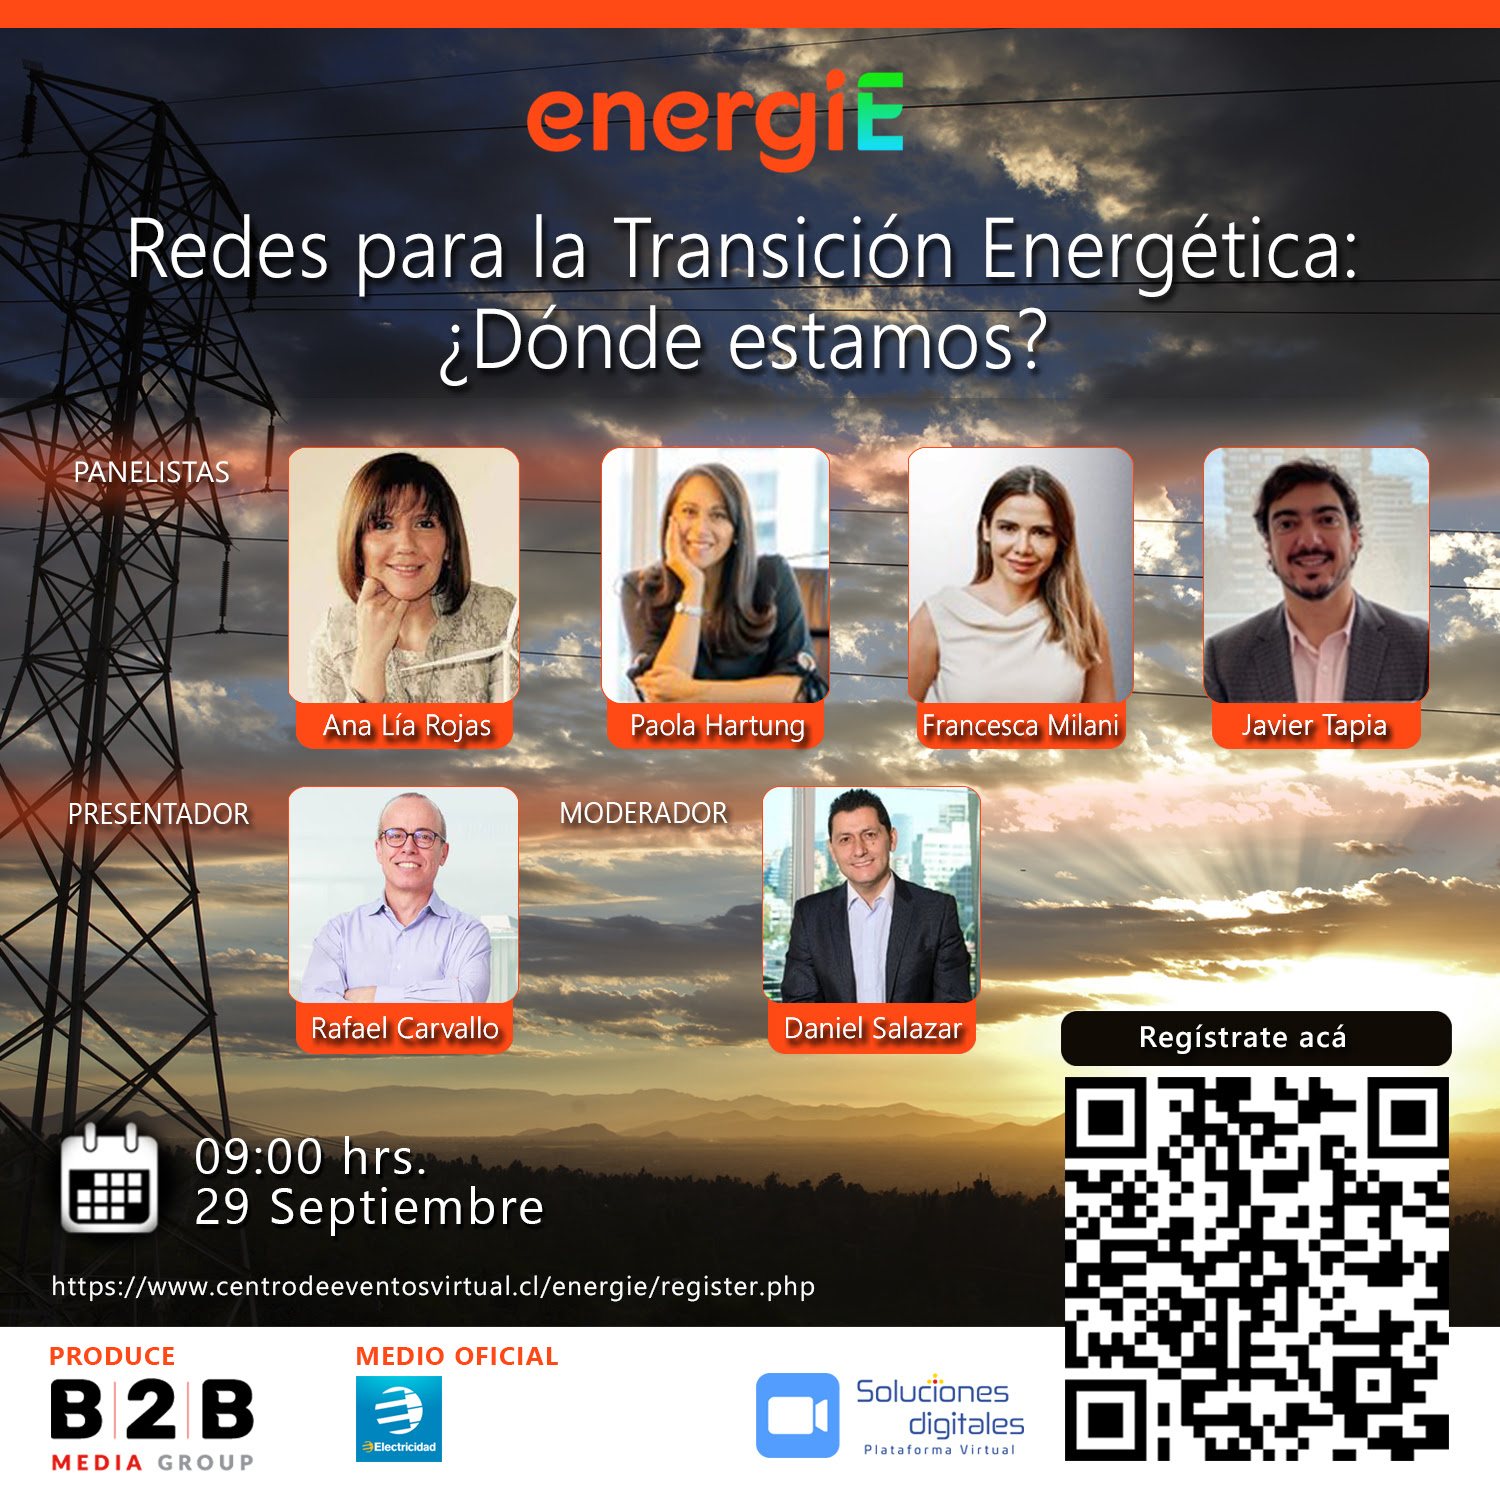 https://www.centrodeeventosvirtual.cl/energie/register.php